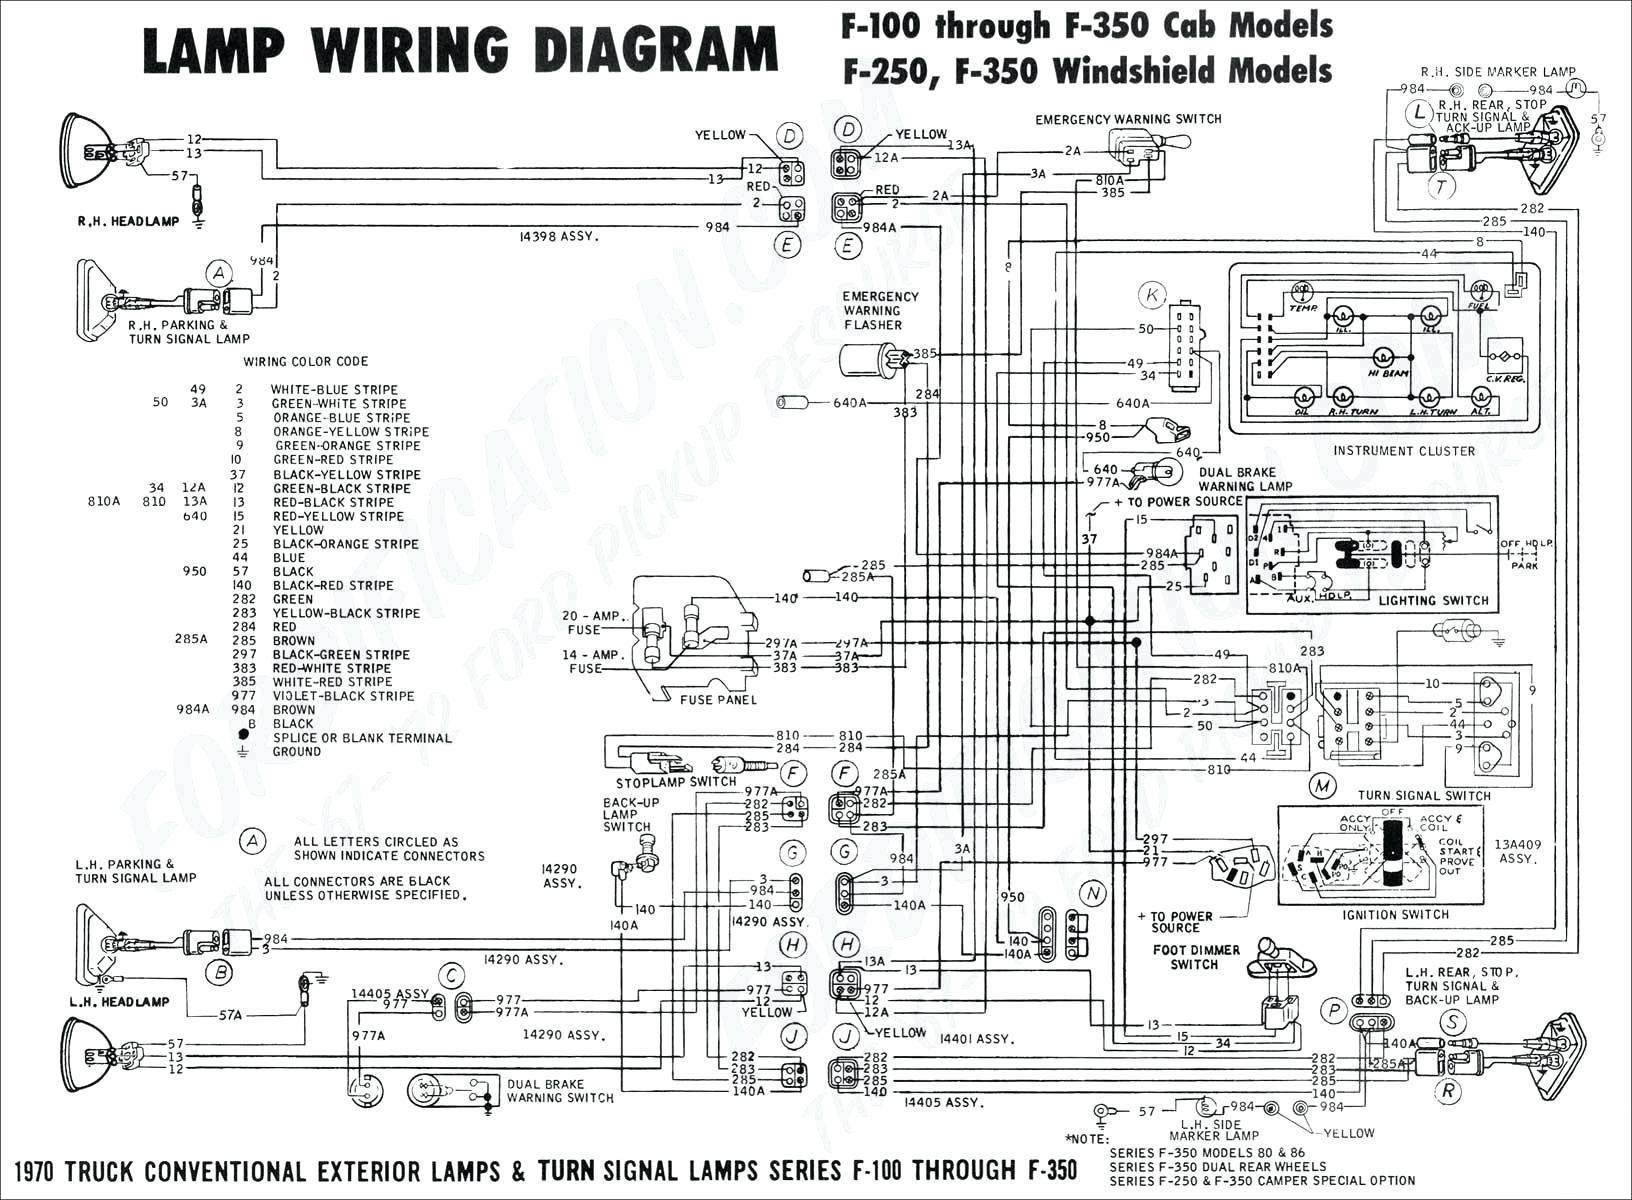 Wiring Diagram for Daylight Running Lights Fresh Wiring Diagram for Drl Relay Save Wiring Diagram for